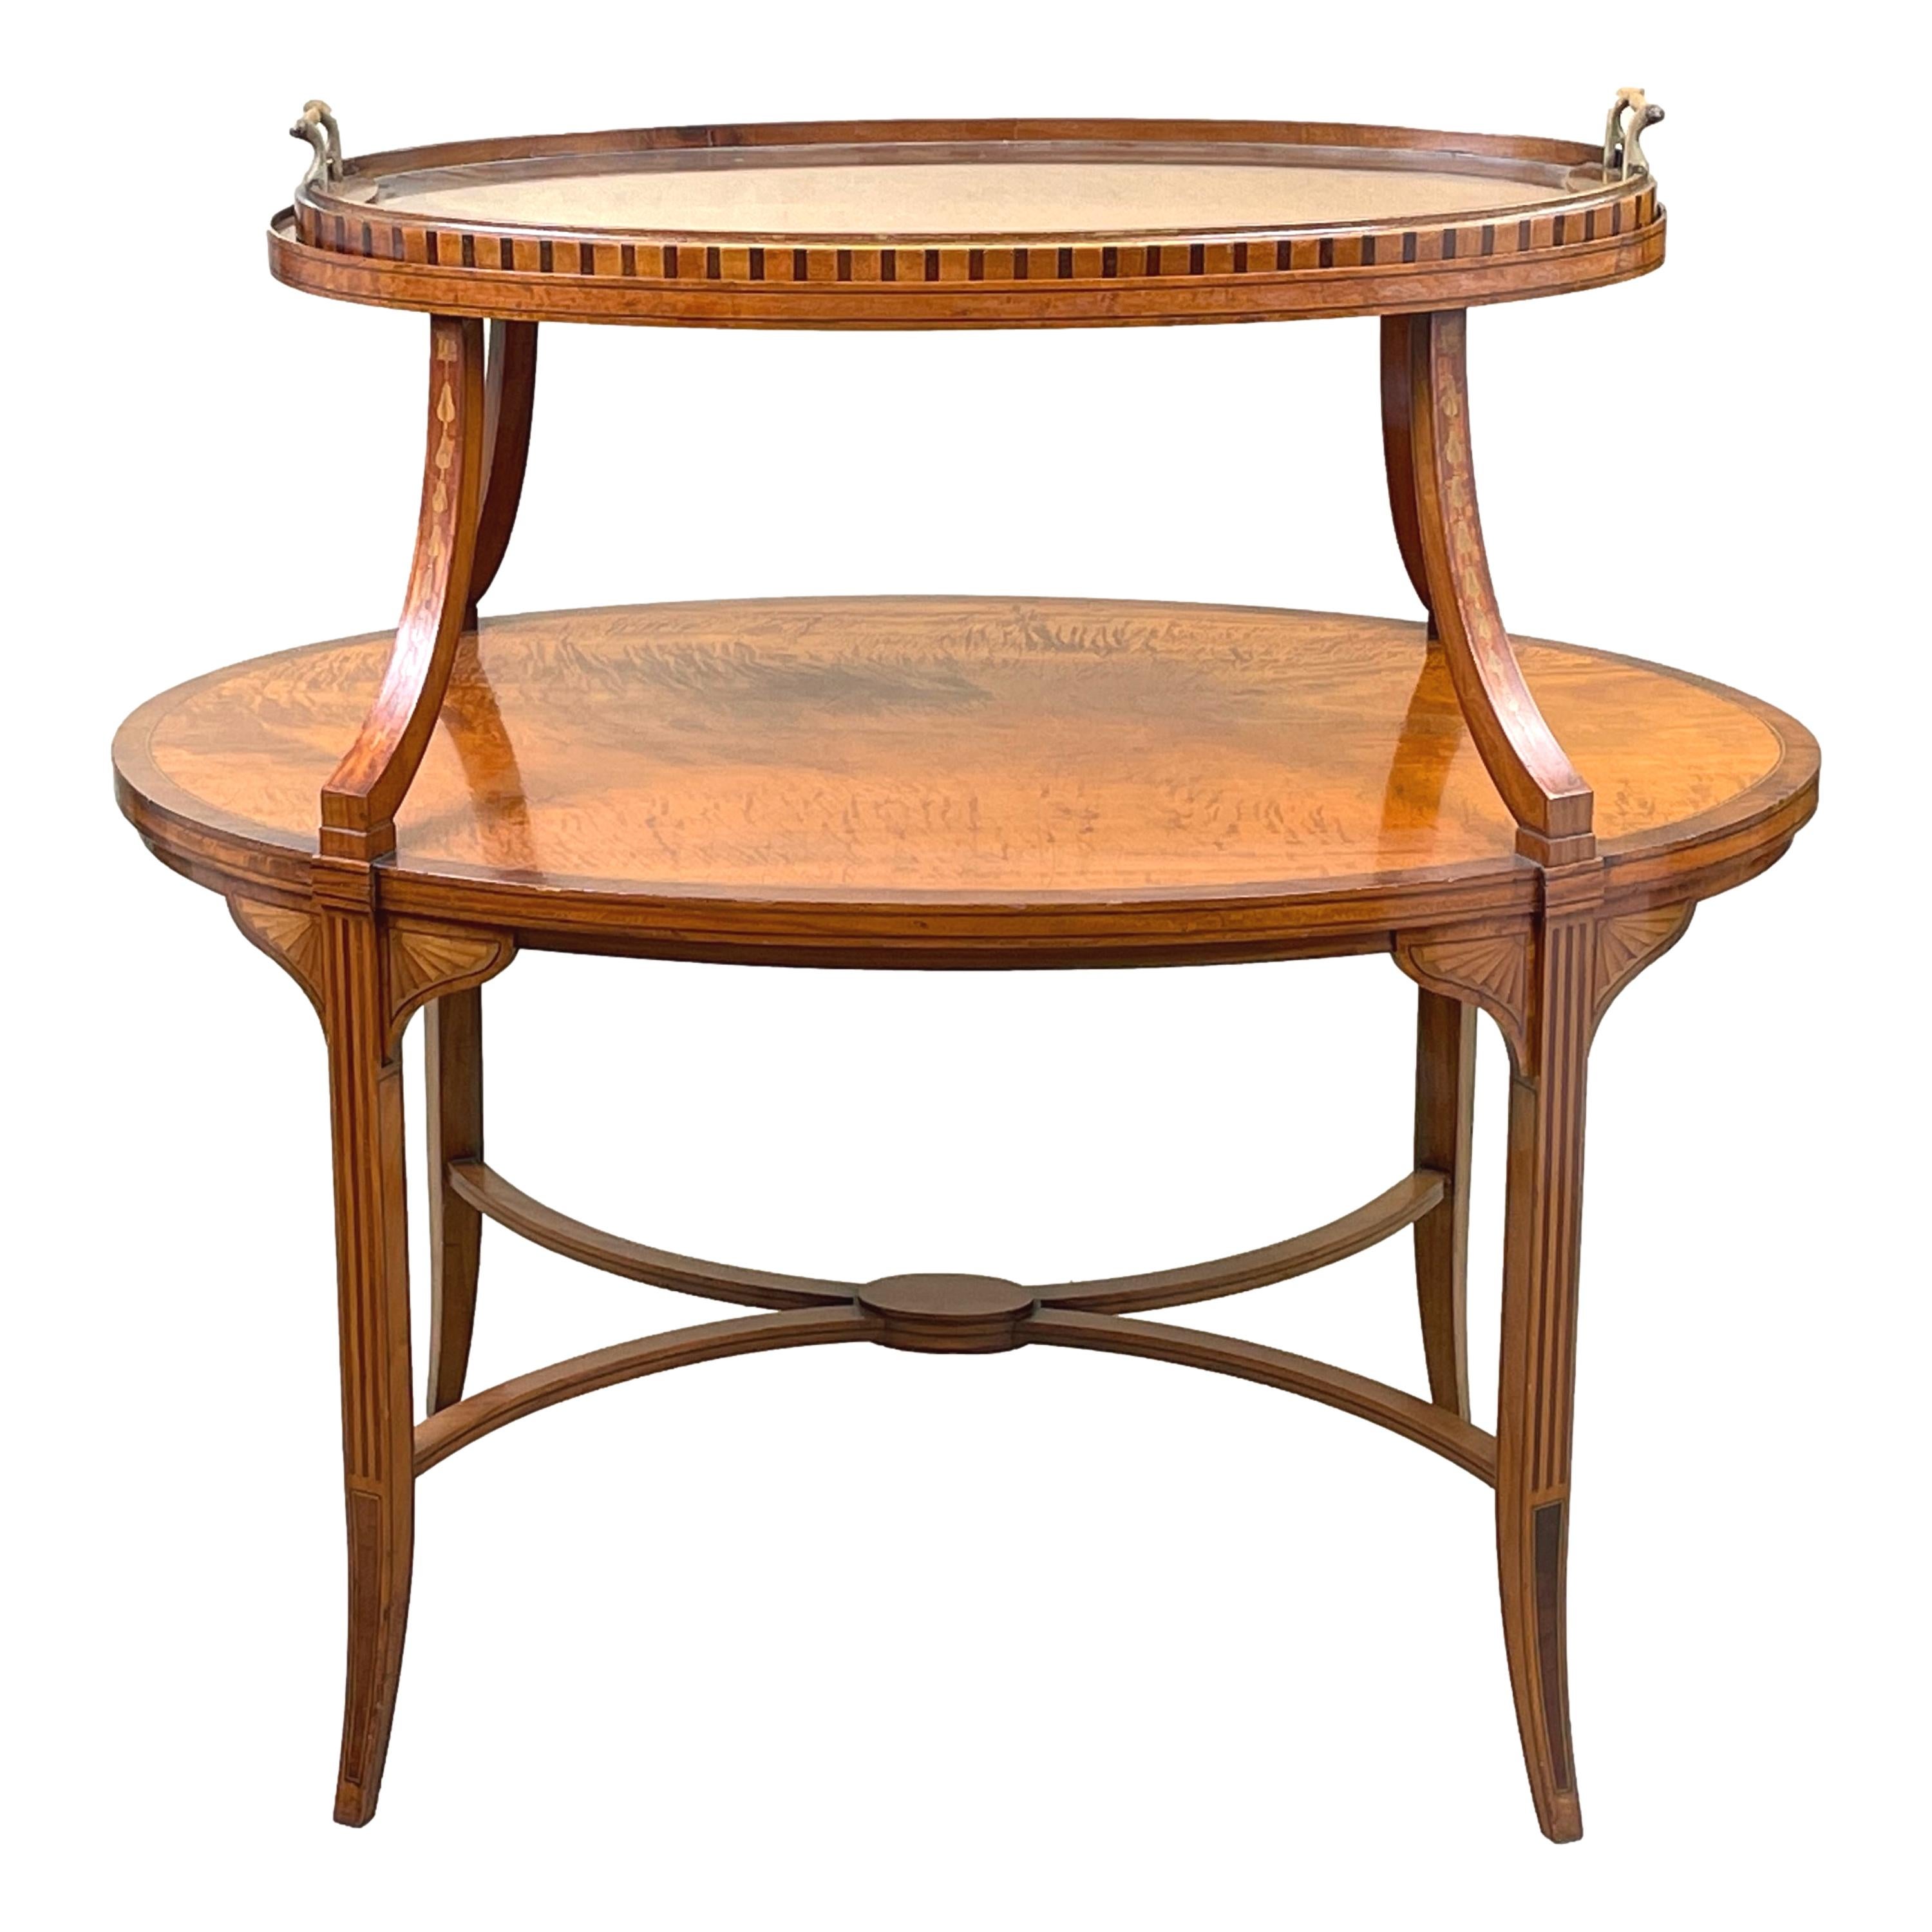 19th Century Satinwood Oval Étagère In Good Condition For Sale In Bedfordshire, GB